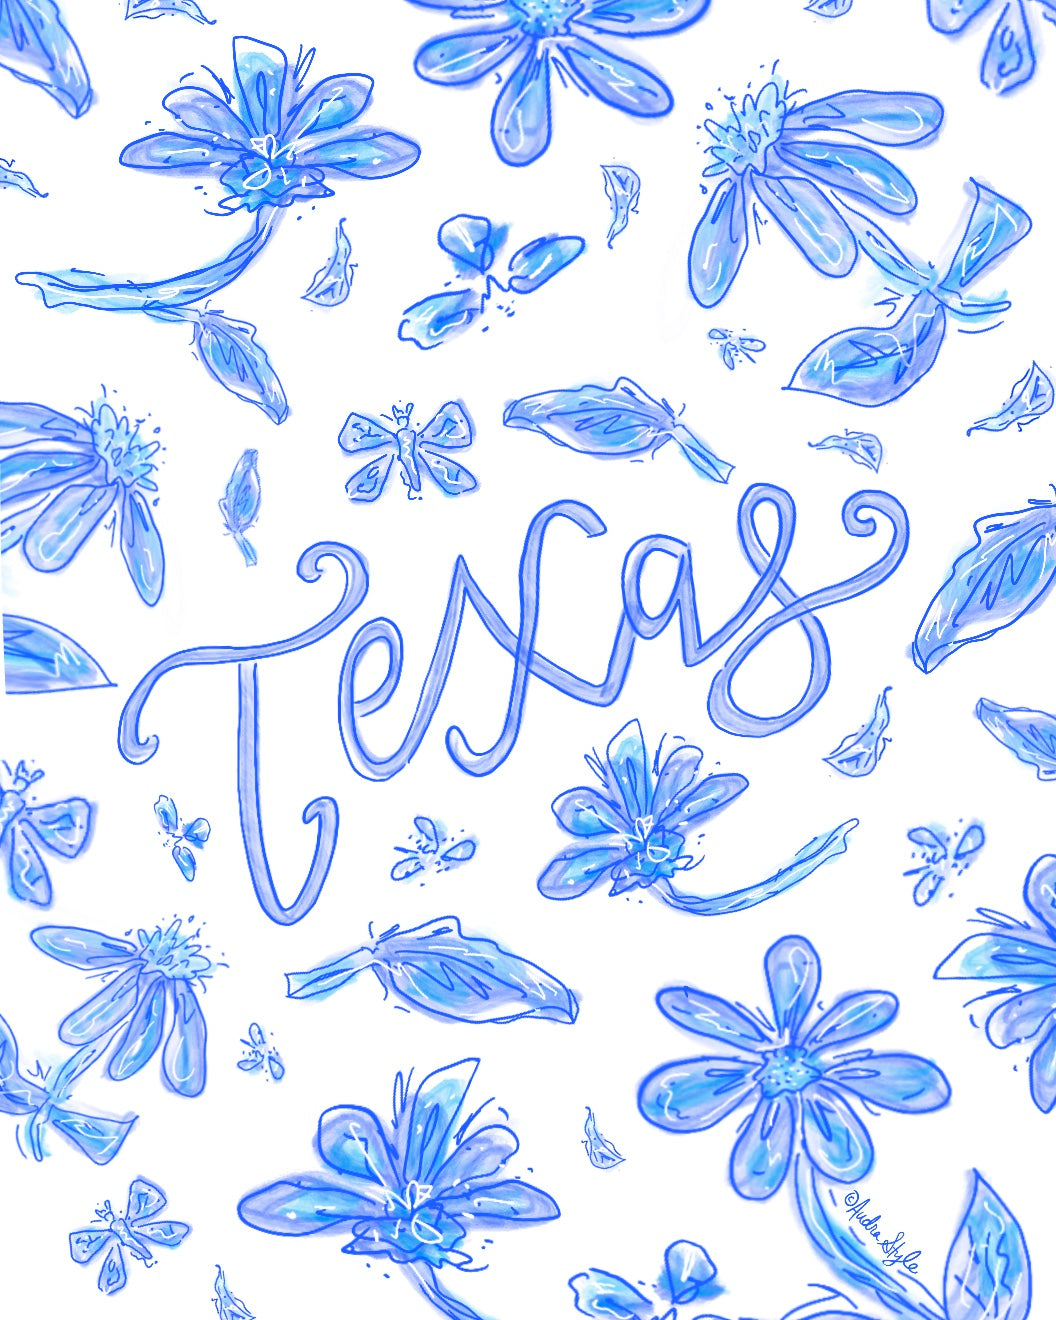 Blue and White Texas Floral Reproduction Print